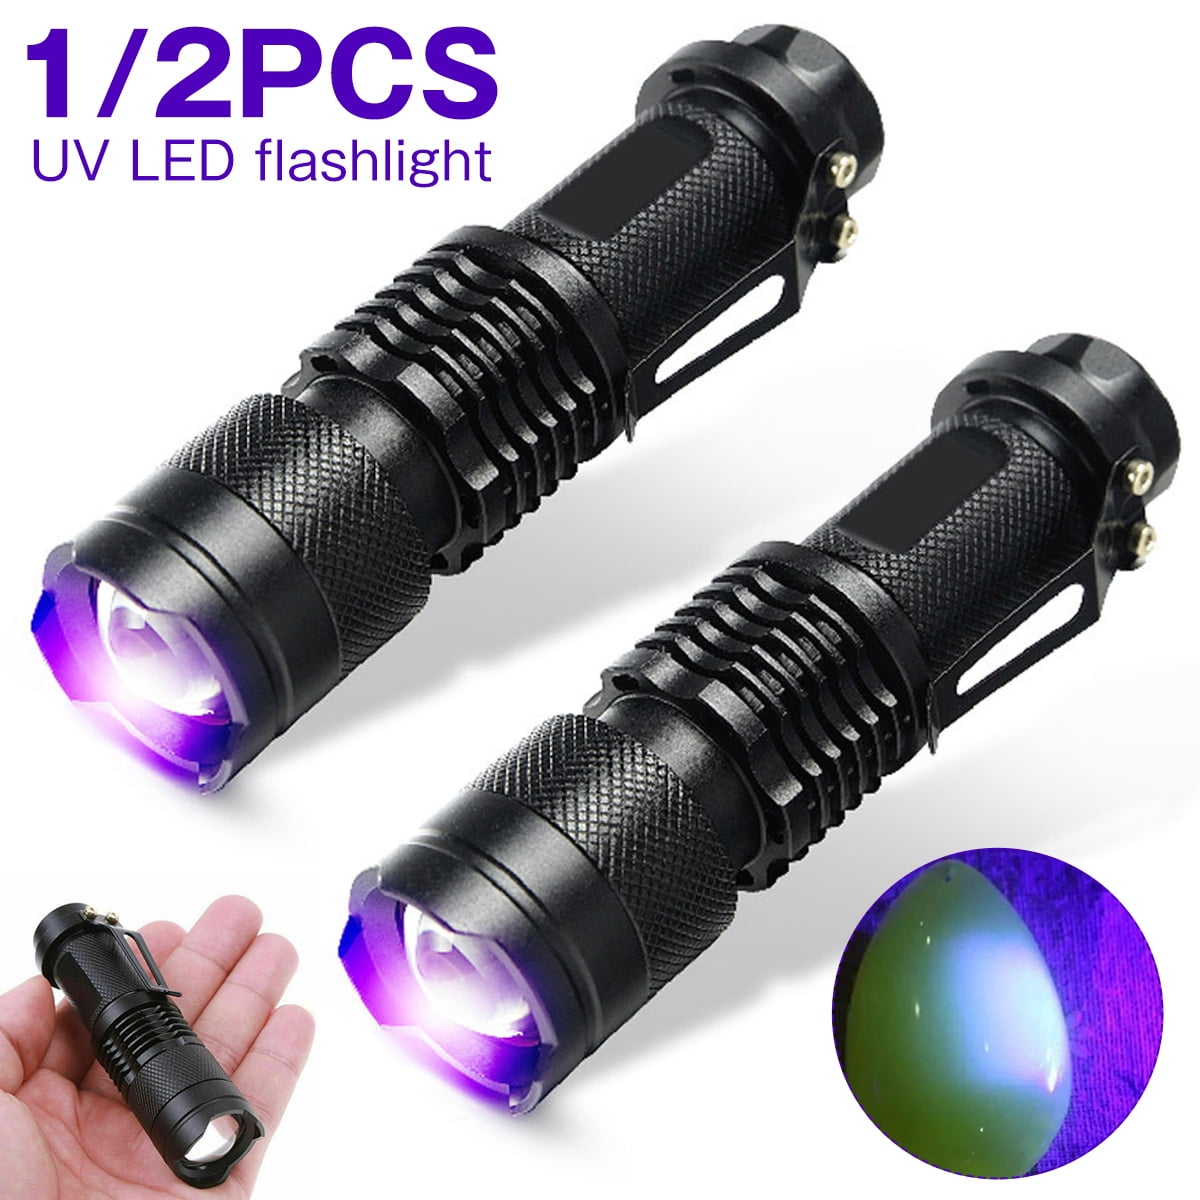 High Performance Aluminium LED Tactical Torch Flash Light40 Times Brighter 